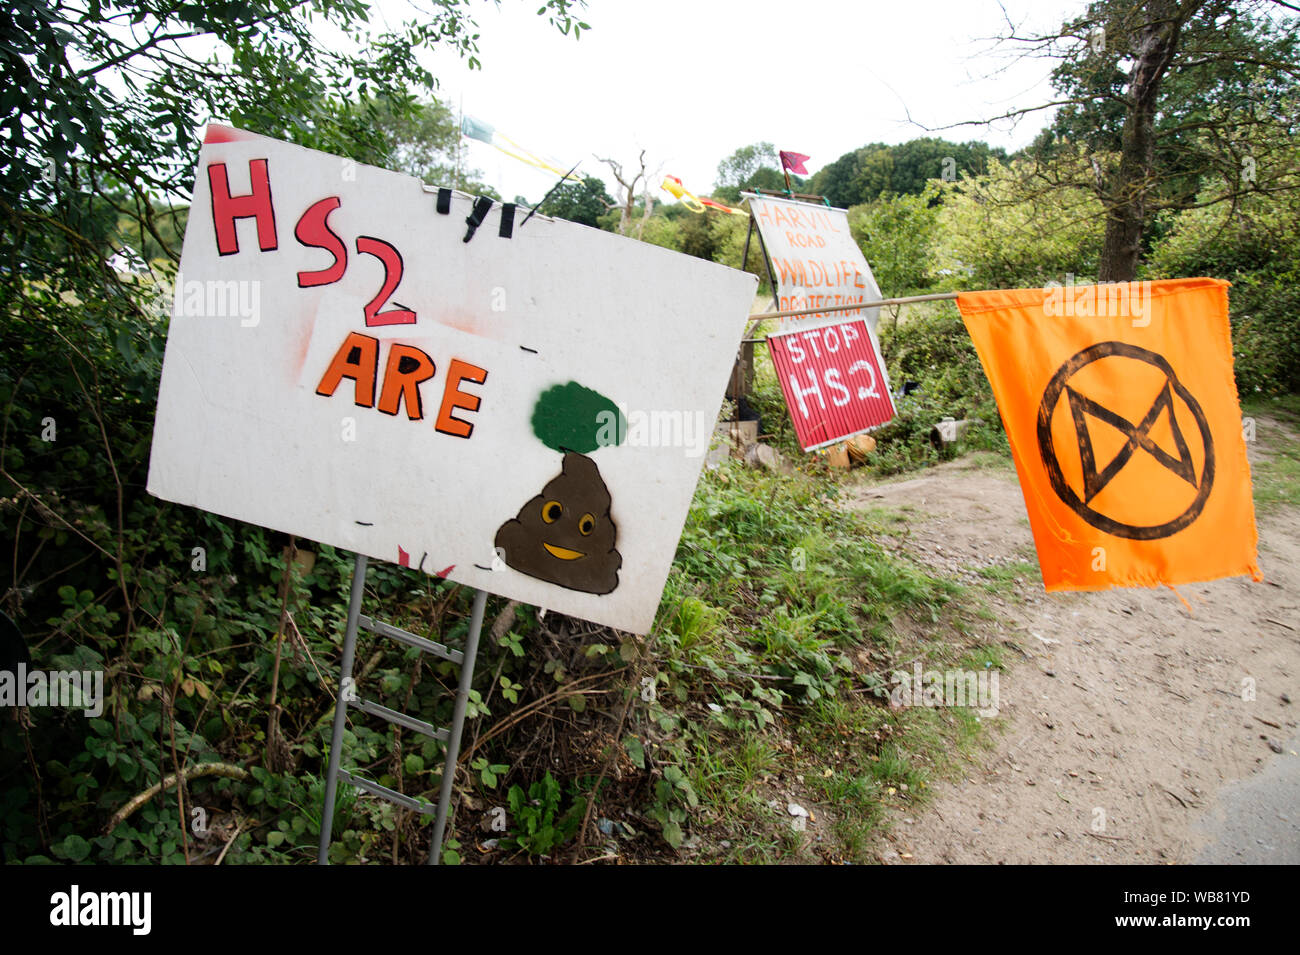 HS2. Colne valley. Harvil Road. Extinction Rebellion camp protest. Stock Photo